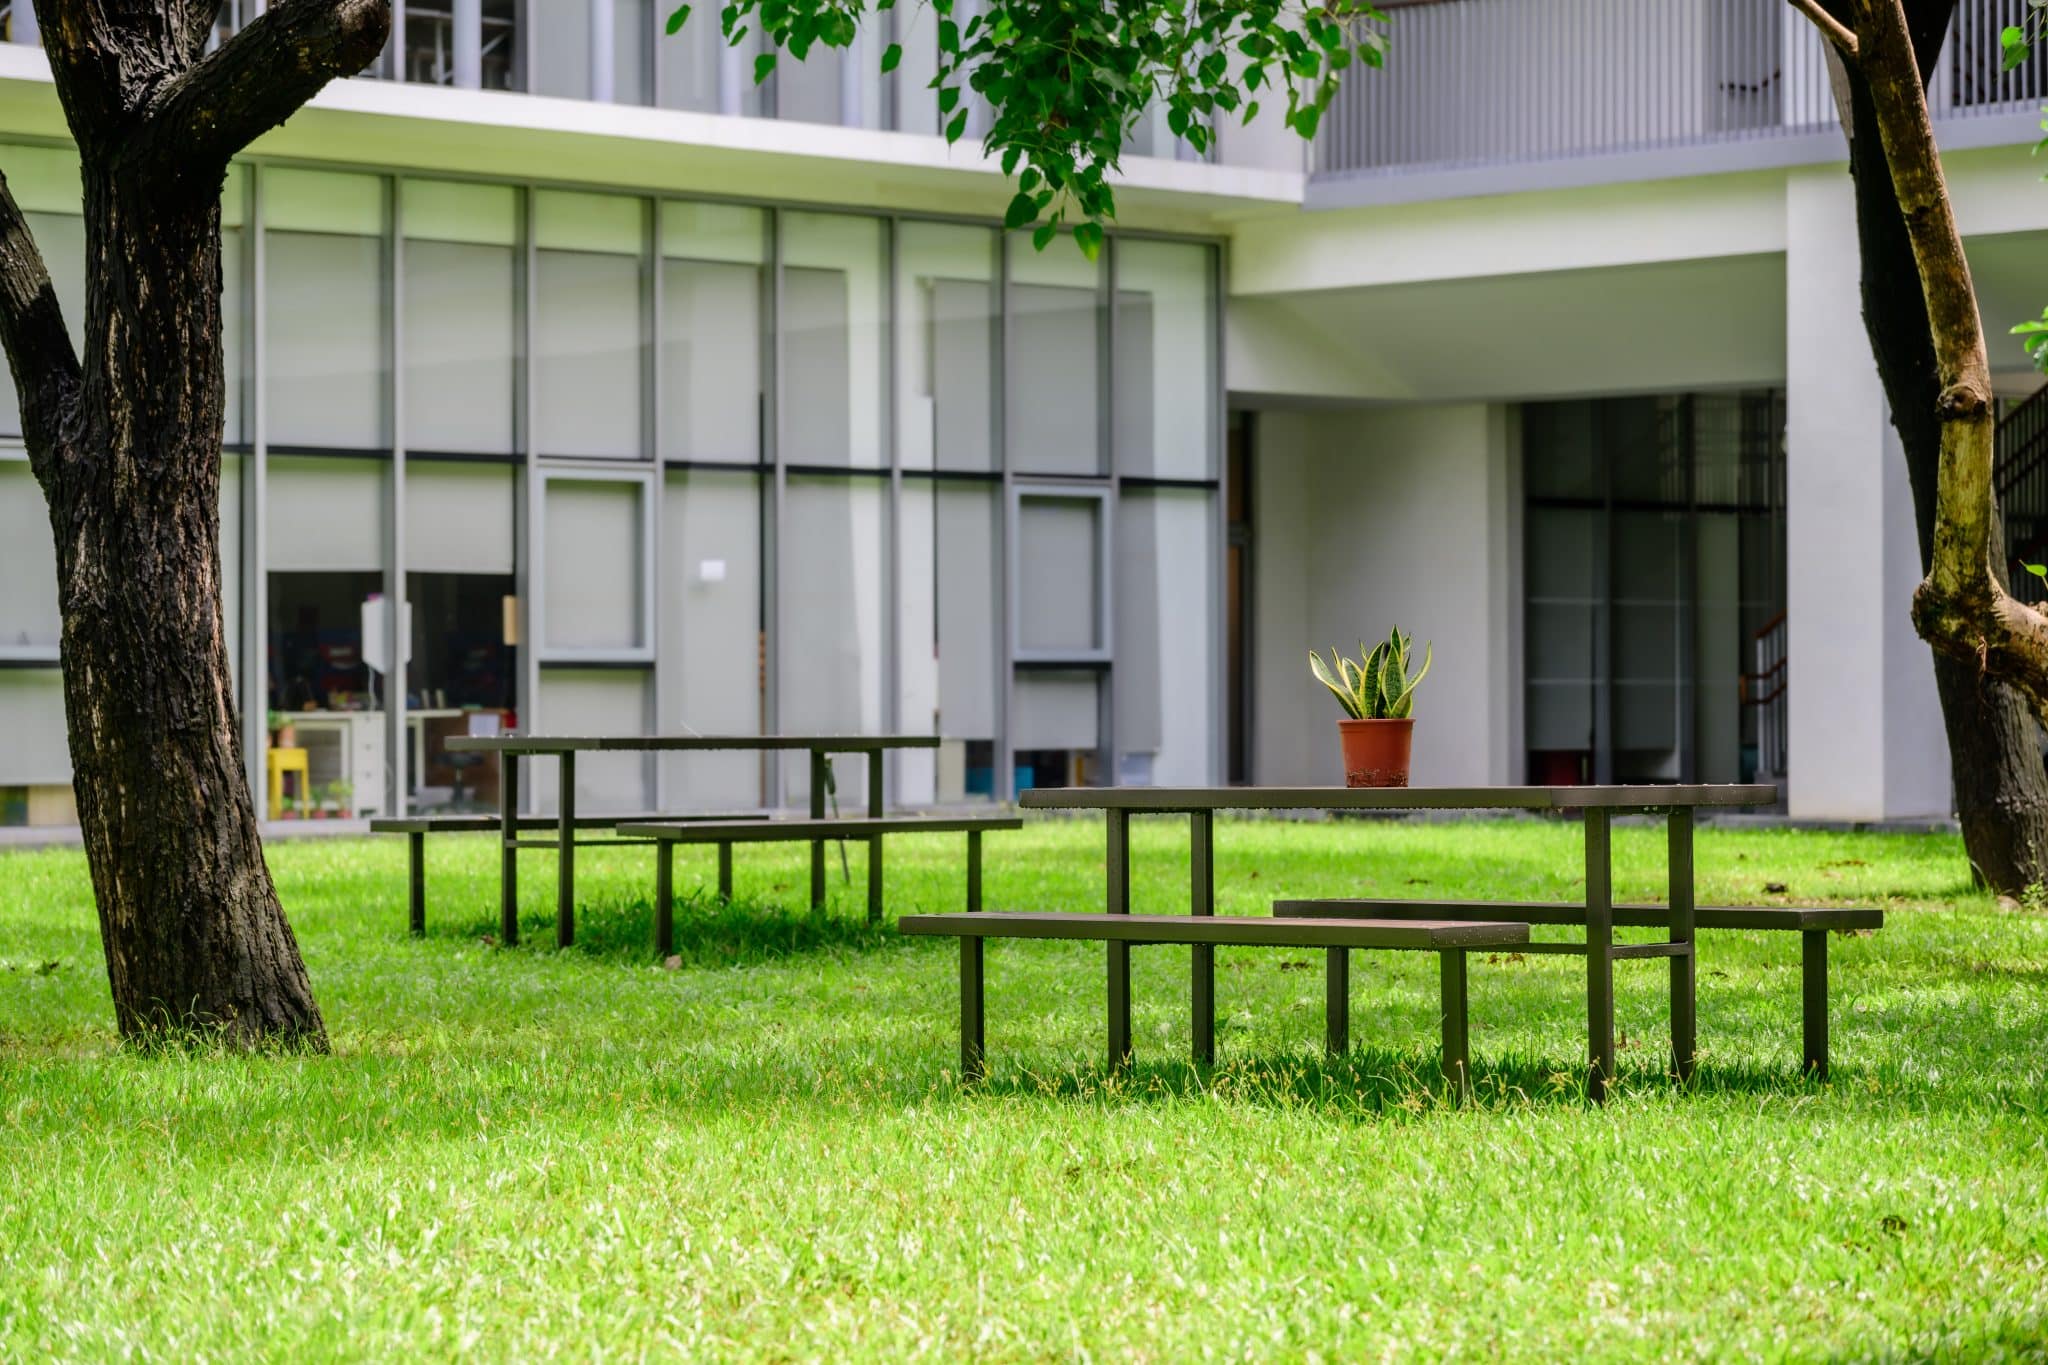 The school architecture was designed with the local culture in mind. In Taiwanese tradition, courtyards are a place for people to gather, connect, and communicate. 